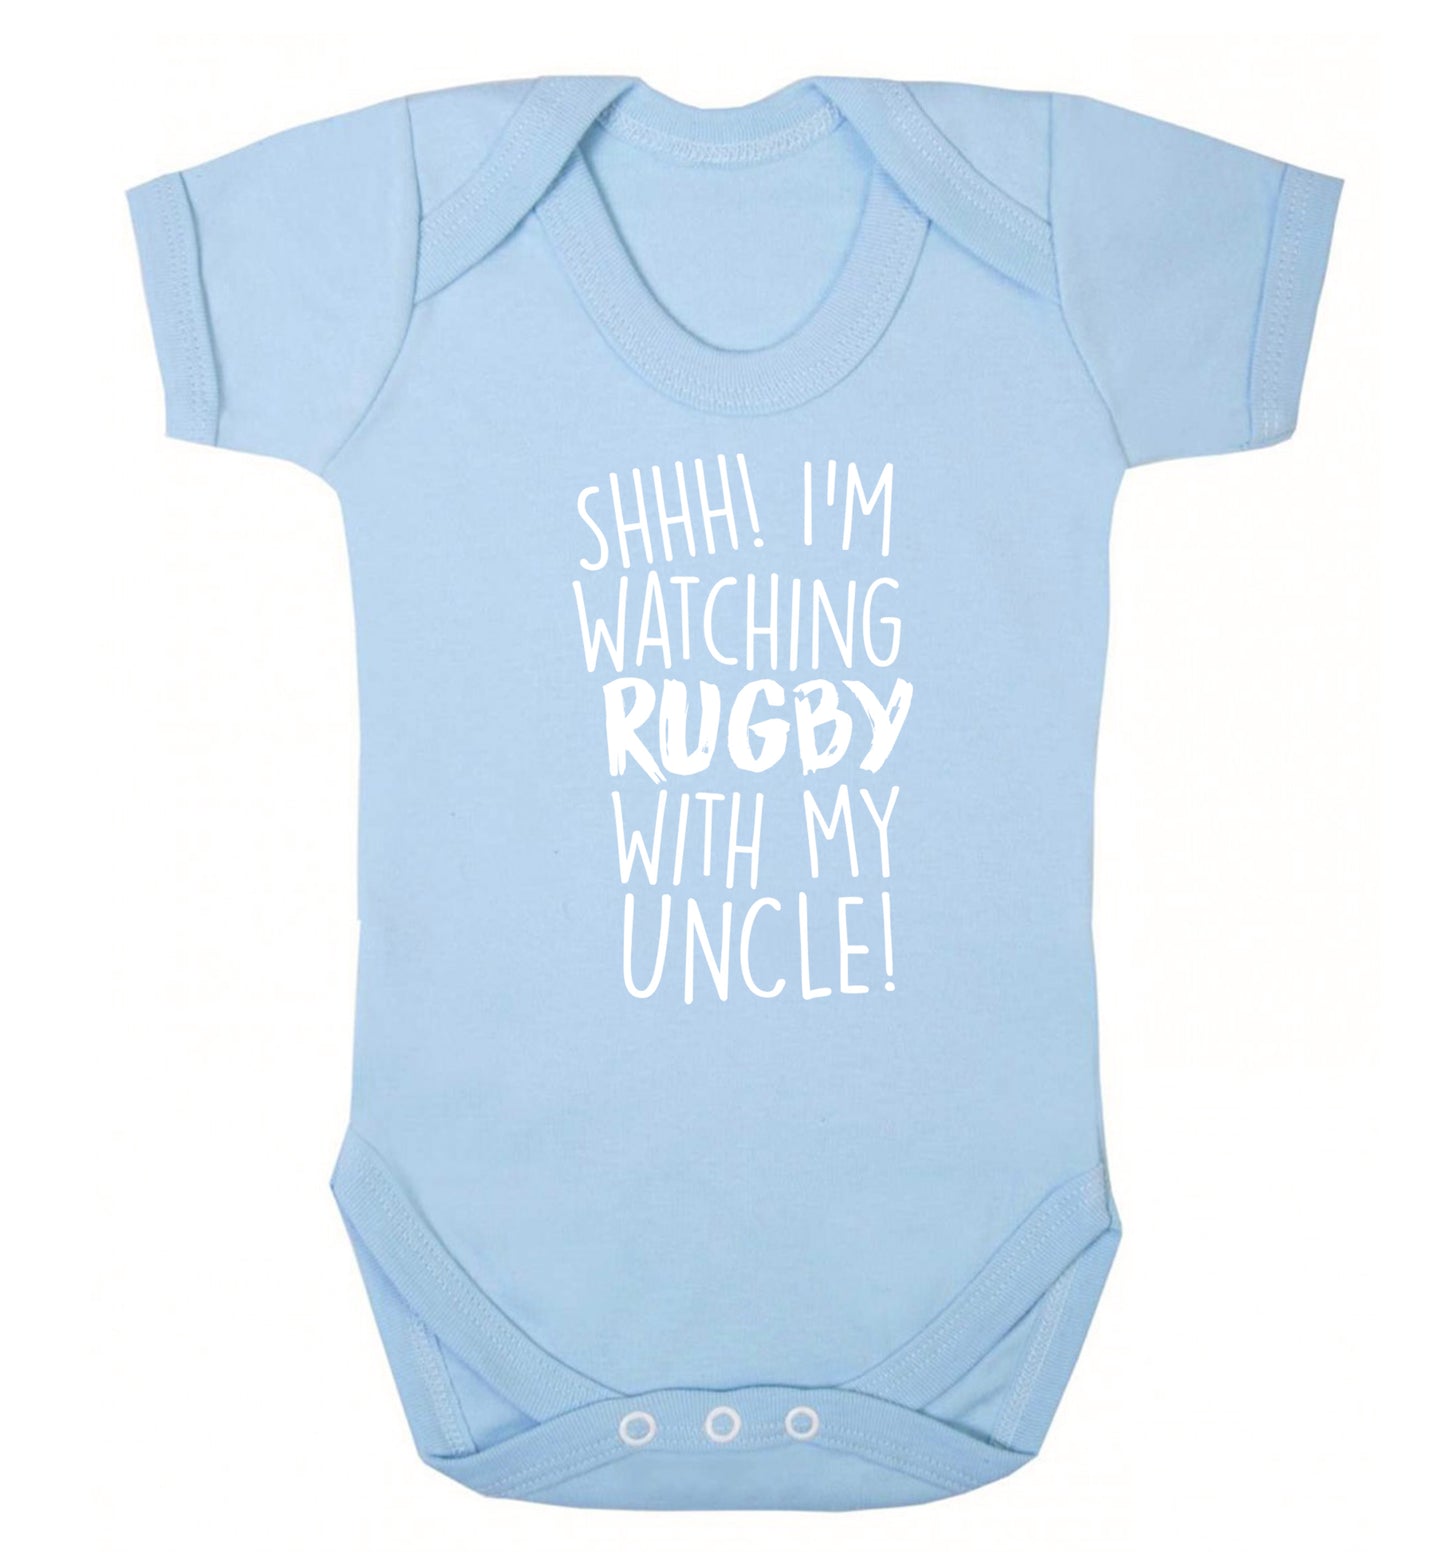 Shh.. I'm watching rugby with my uncle Baby Vest pale blue 18-24 months